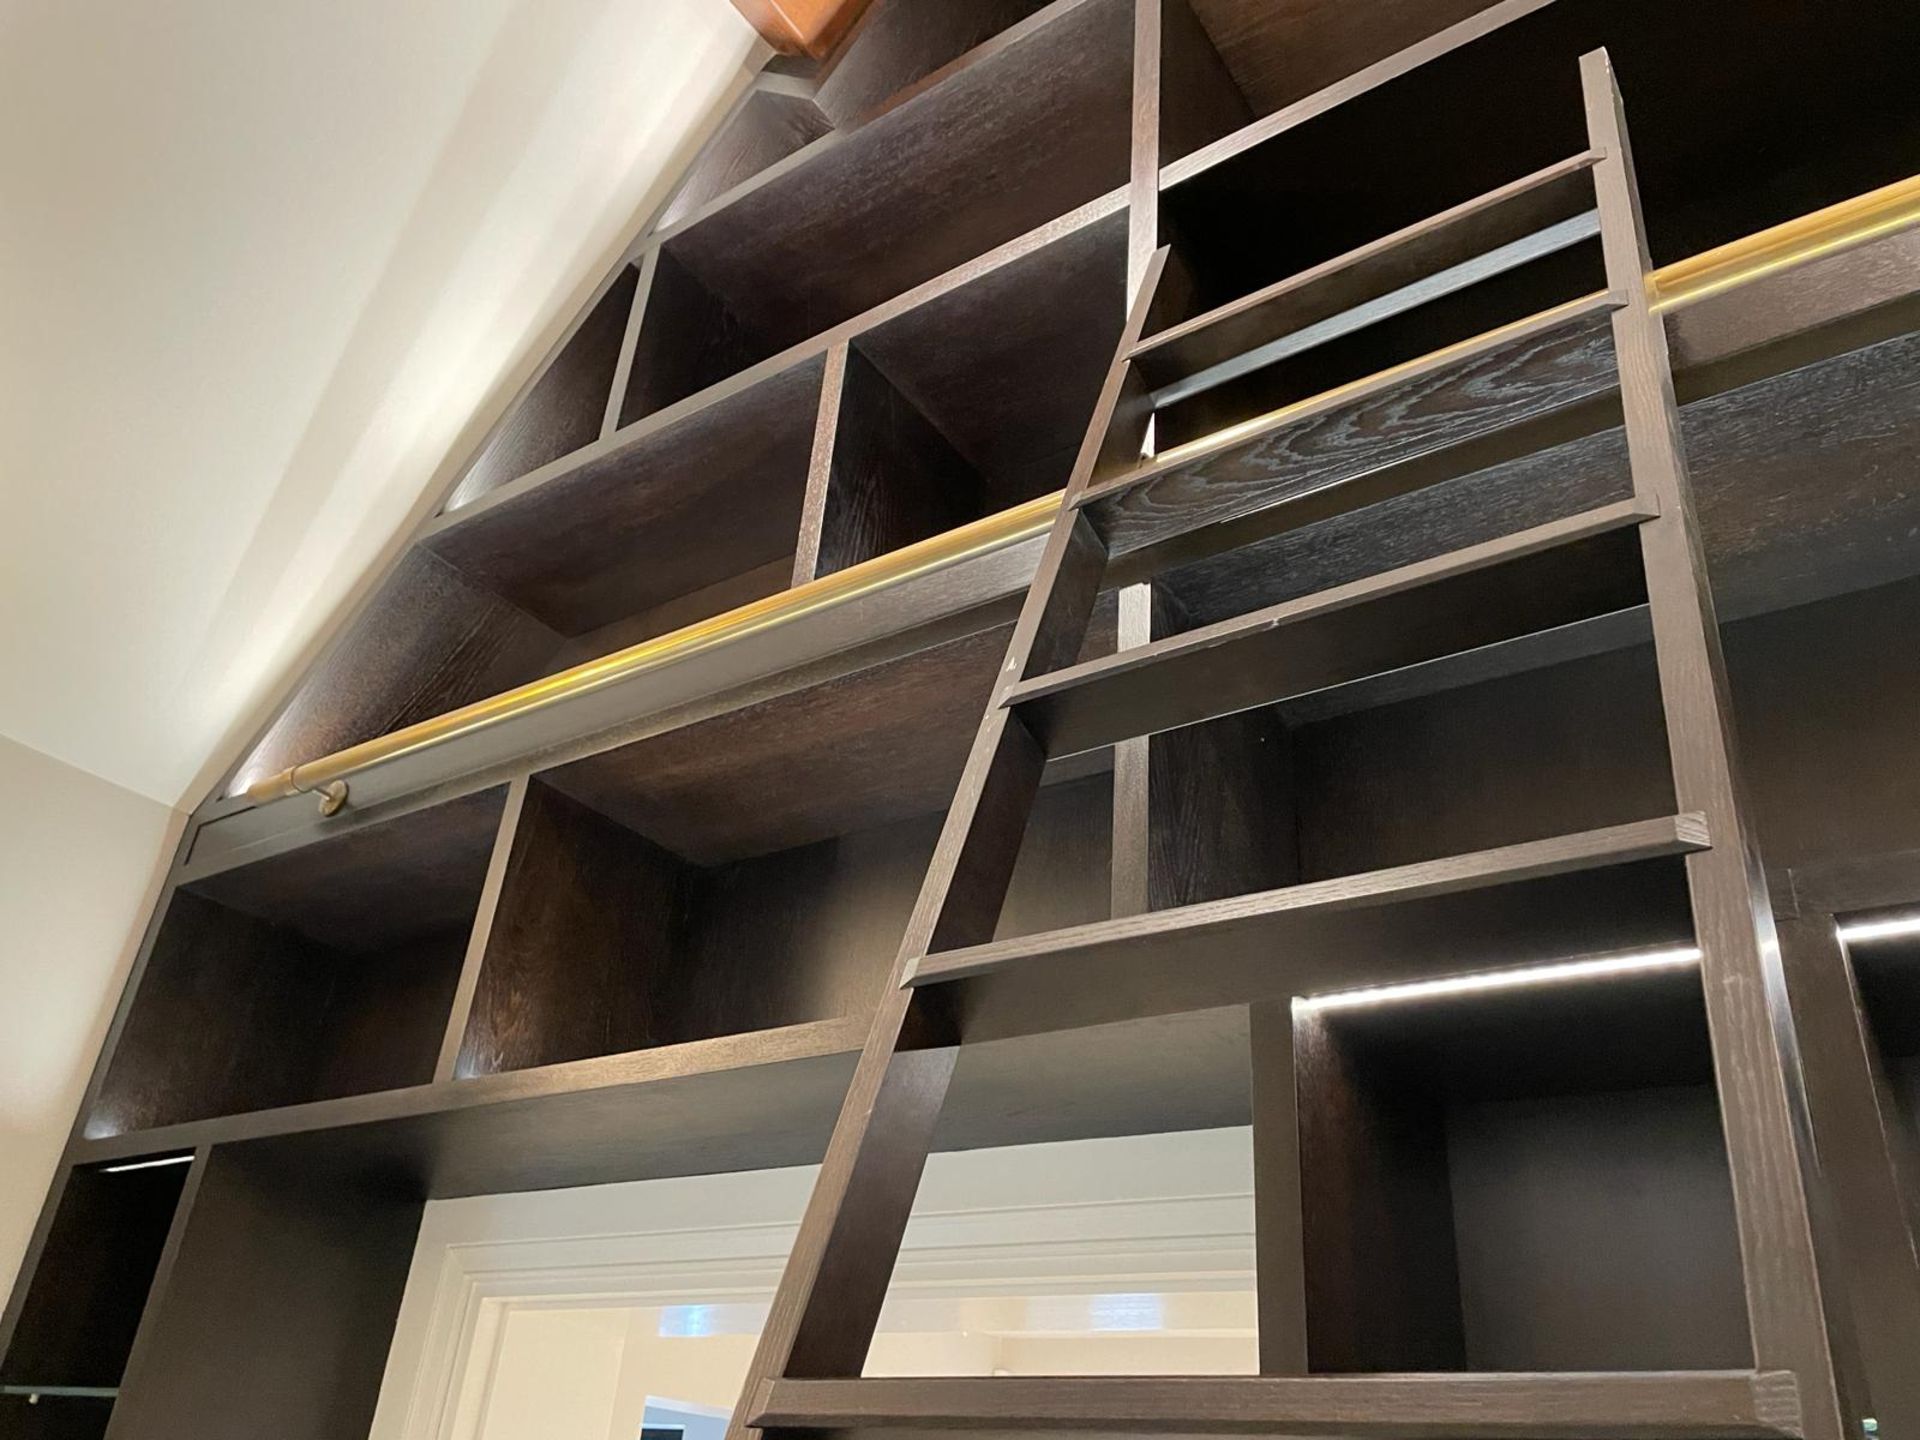 1 x Bespoke 4.7-Metre Wide Fitted Luxury Home Library Solid Wood Bookcase Wall Storage - Image 2 of 23